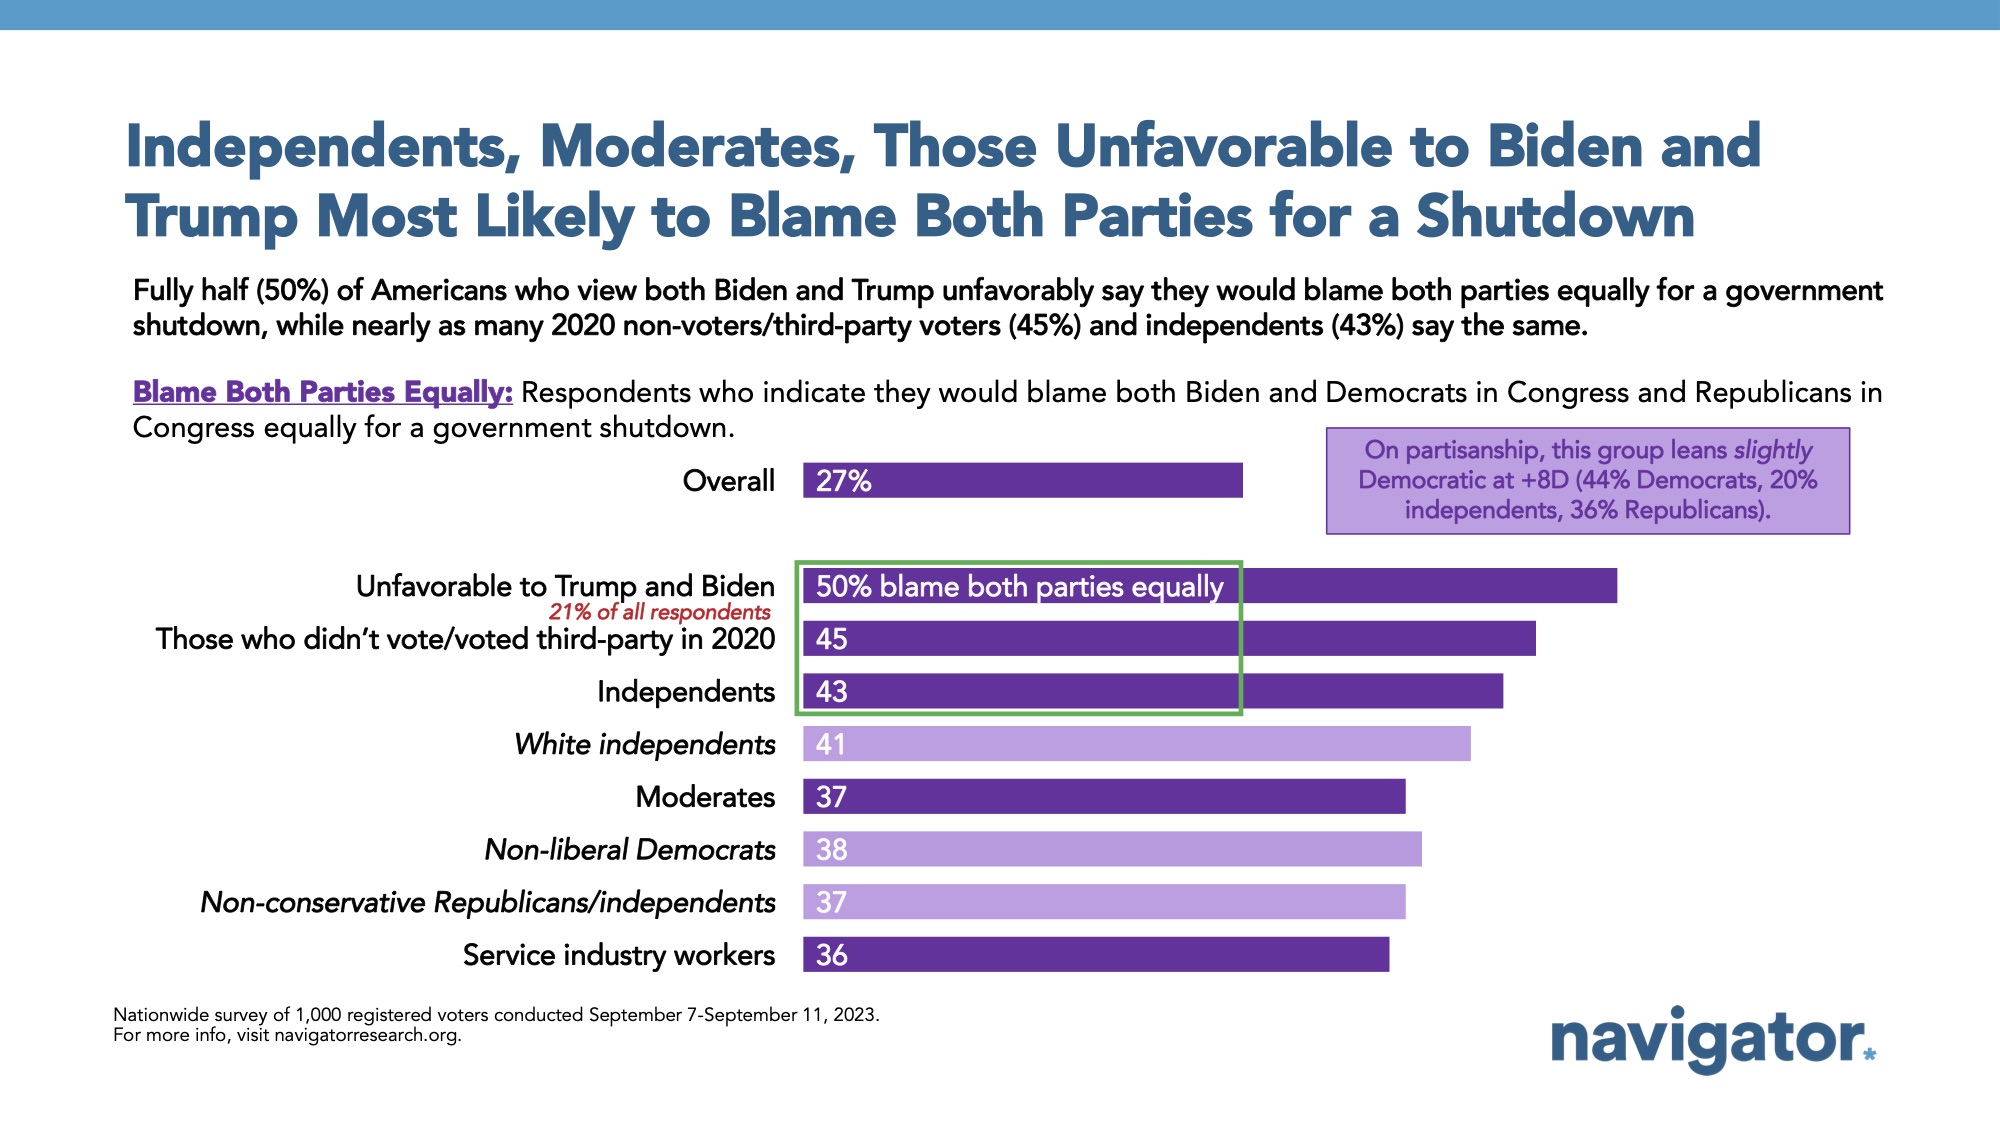 Bar graph of polling data. Title: Independents, Moderates, Those Unfavorable to Biden and Trump Most Likely to Blame Both Parties for a Shutdown